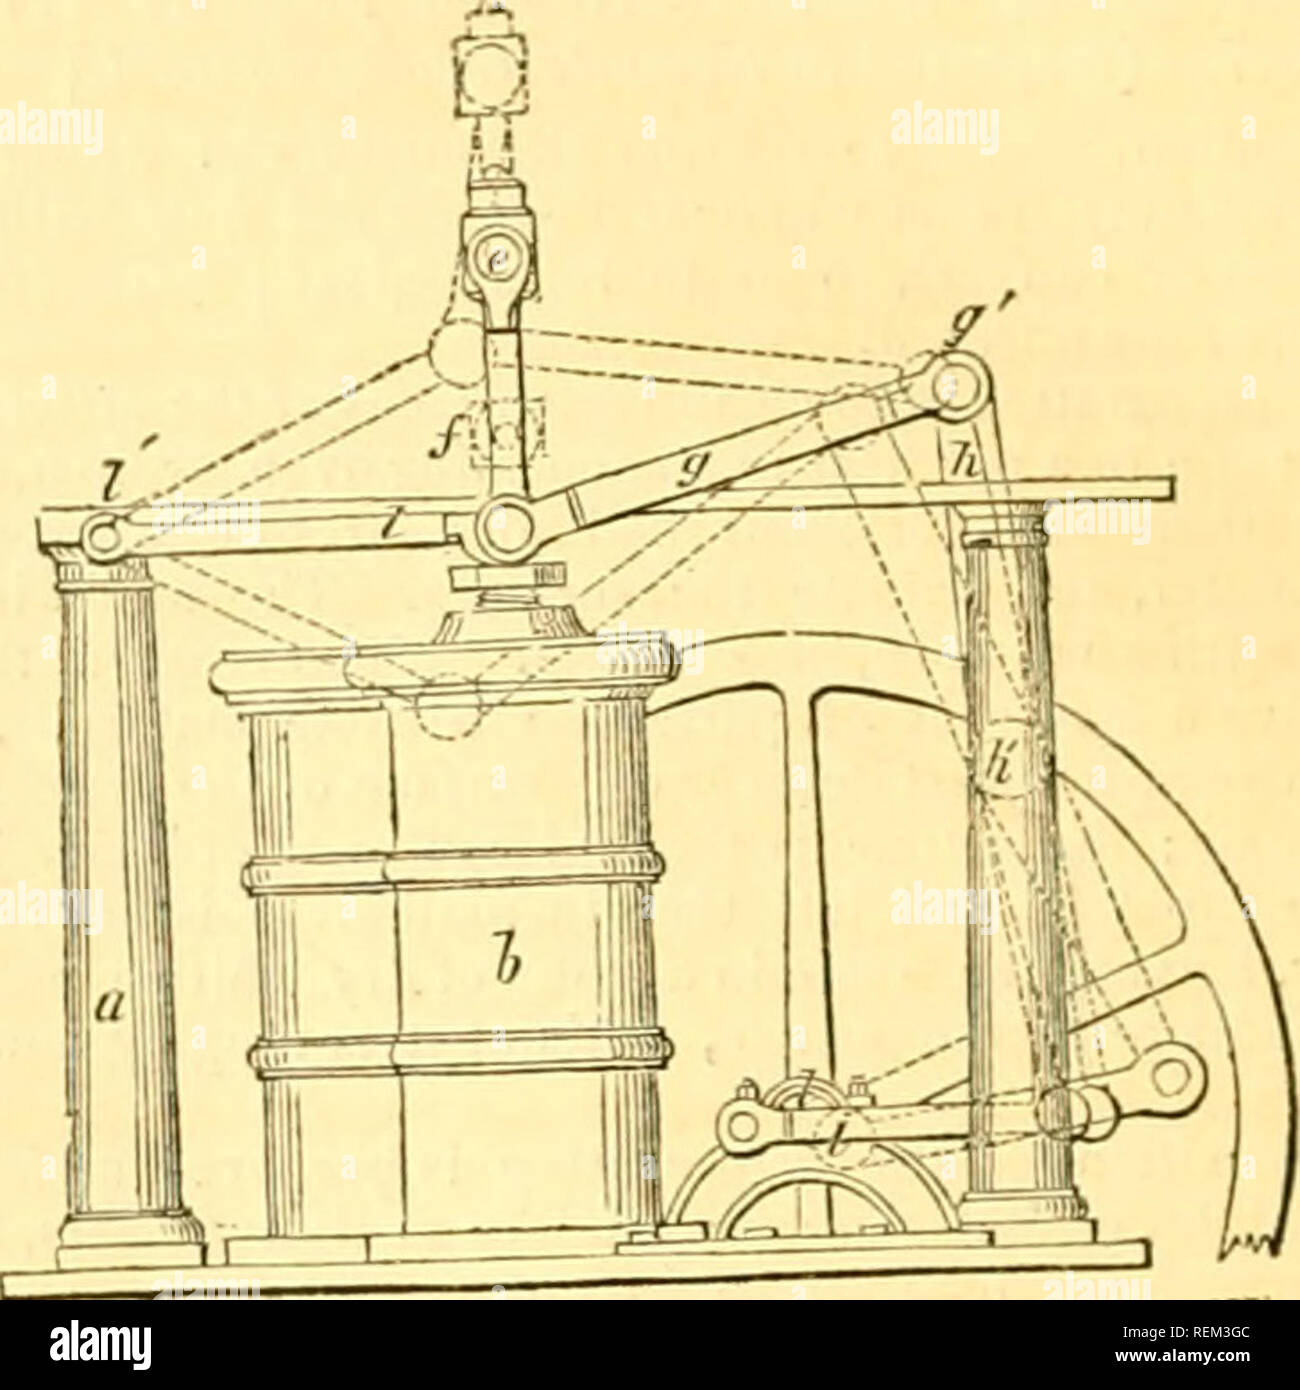 . The Civil engineer and architect's journal, scientific and railway gazette. Architecture; Civil engineering; Science. D(^ Fig. 2. given by a steam engine or other power; on the axis b, is a pinion c, wliich takes into and drives the cog-wheel d,on the craiik axis, e, and gives motion to the arm/, by the link g, and carrying the i|&gt;per face plate /(. /, is tlie lowLM face plate, upon which a length of iron A, for the intended link and heated to a nn derate heat, is to be held so as that by the descent of the arm /, a flattened part, as shov;n at B, is produced, and then the length ol meta Stock Photo